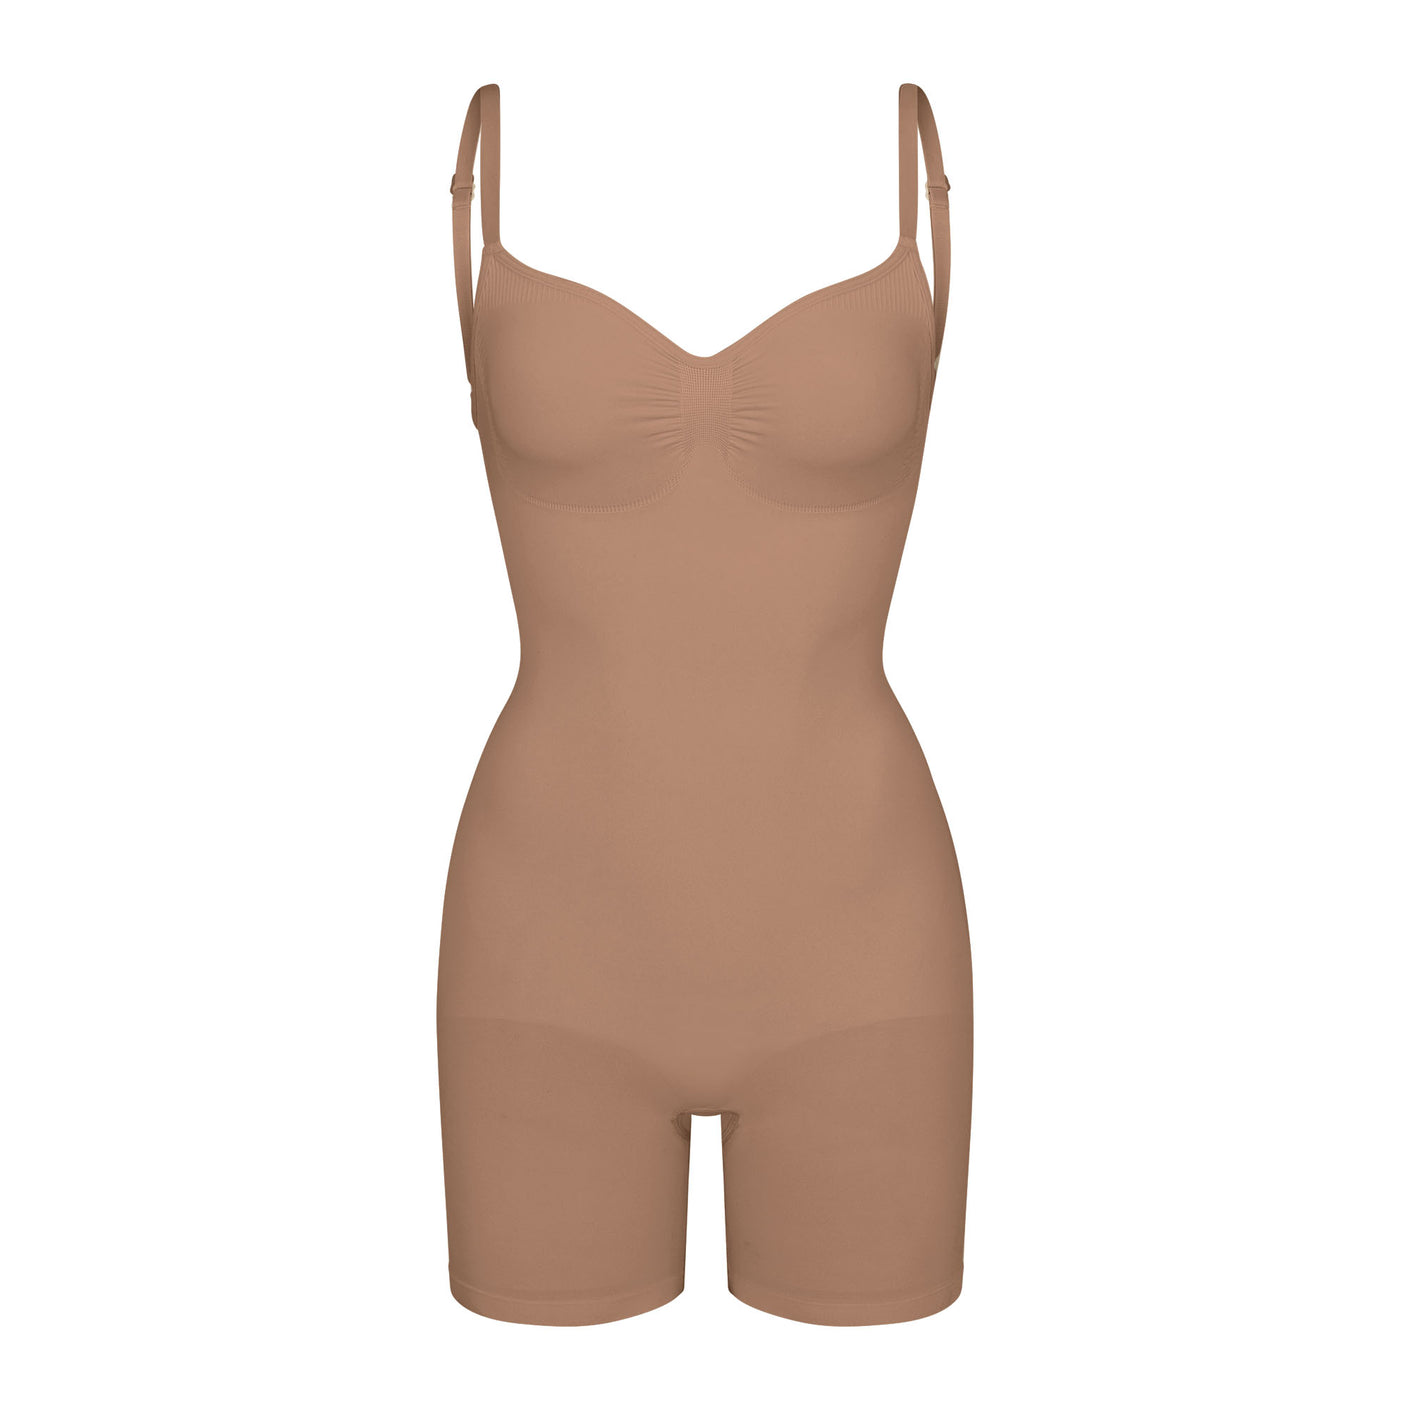 SKIMS - The Sheer Sculpt Thong Bodysuit ($54). Its silky